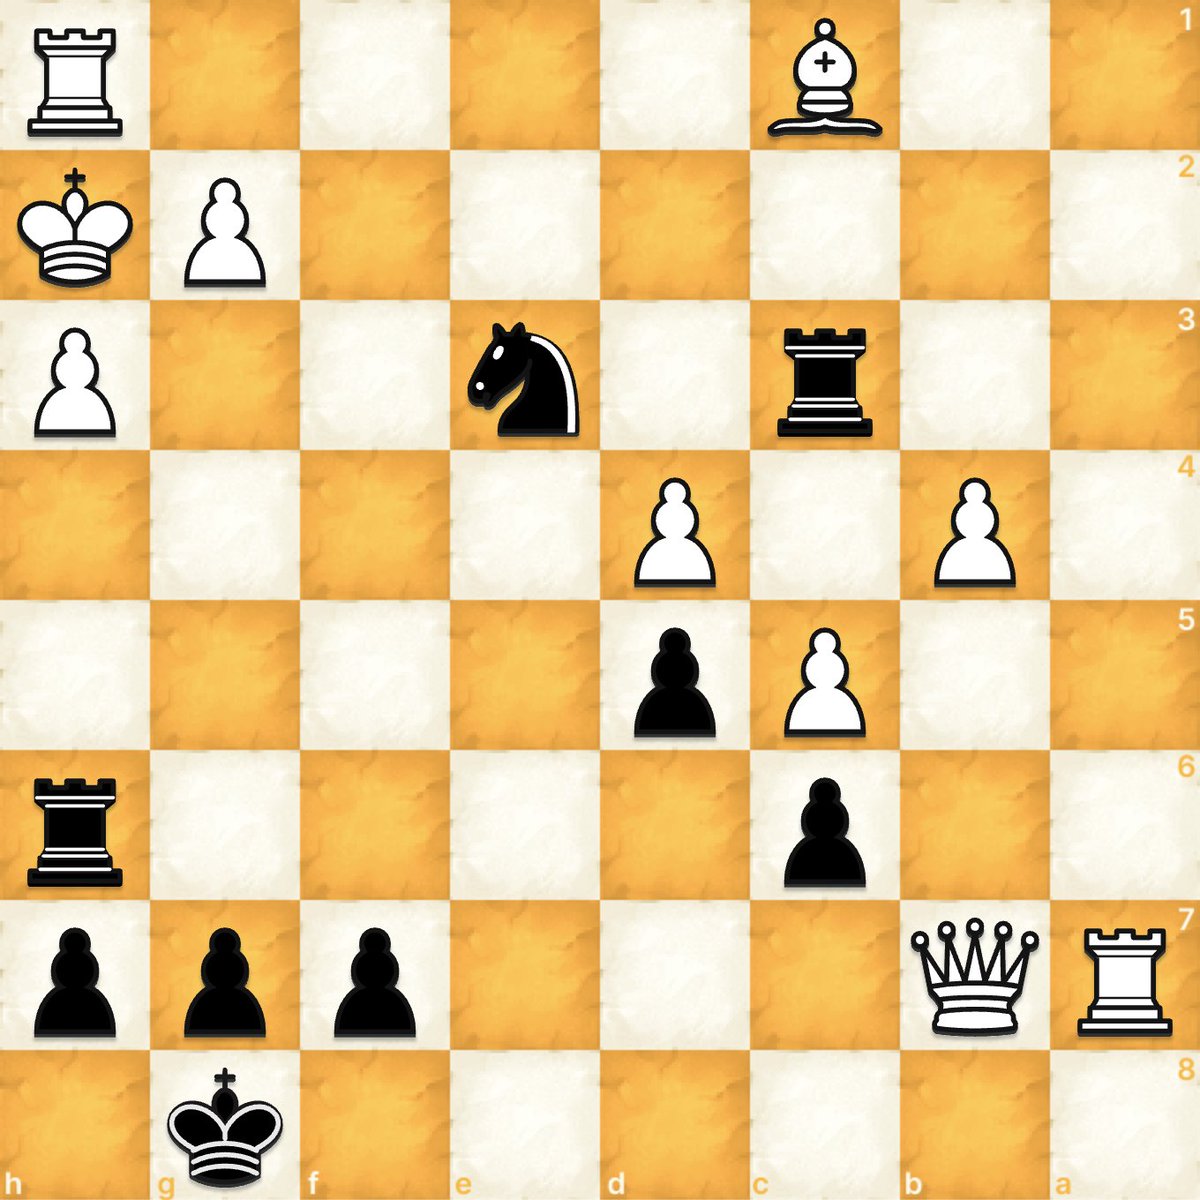 💥🛡️⚔️ Blacks crucial decision! Blast through the defenses with a master stroke. Are you ready?  
. 
. 
. 
#CriticalMoves #ChessAttack #MasterClass #PlayChess